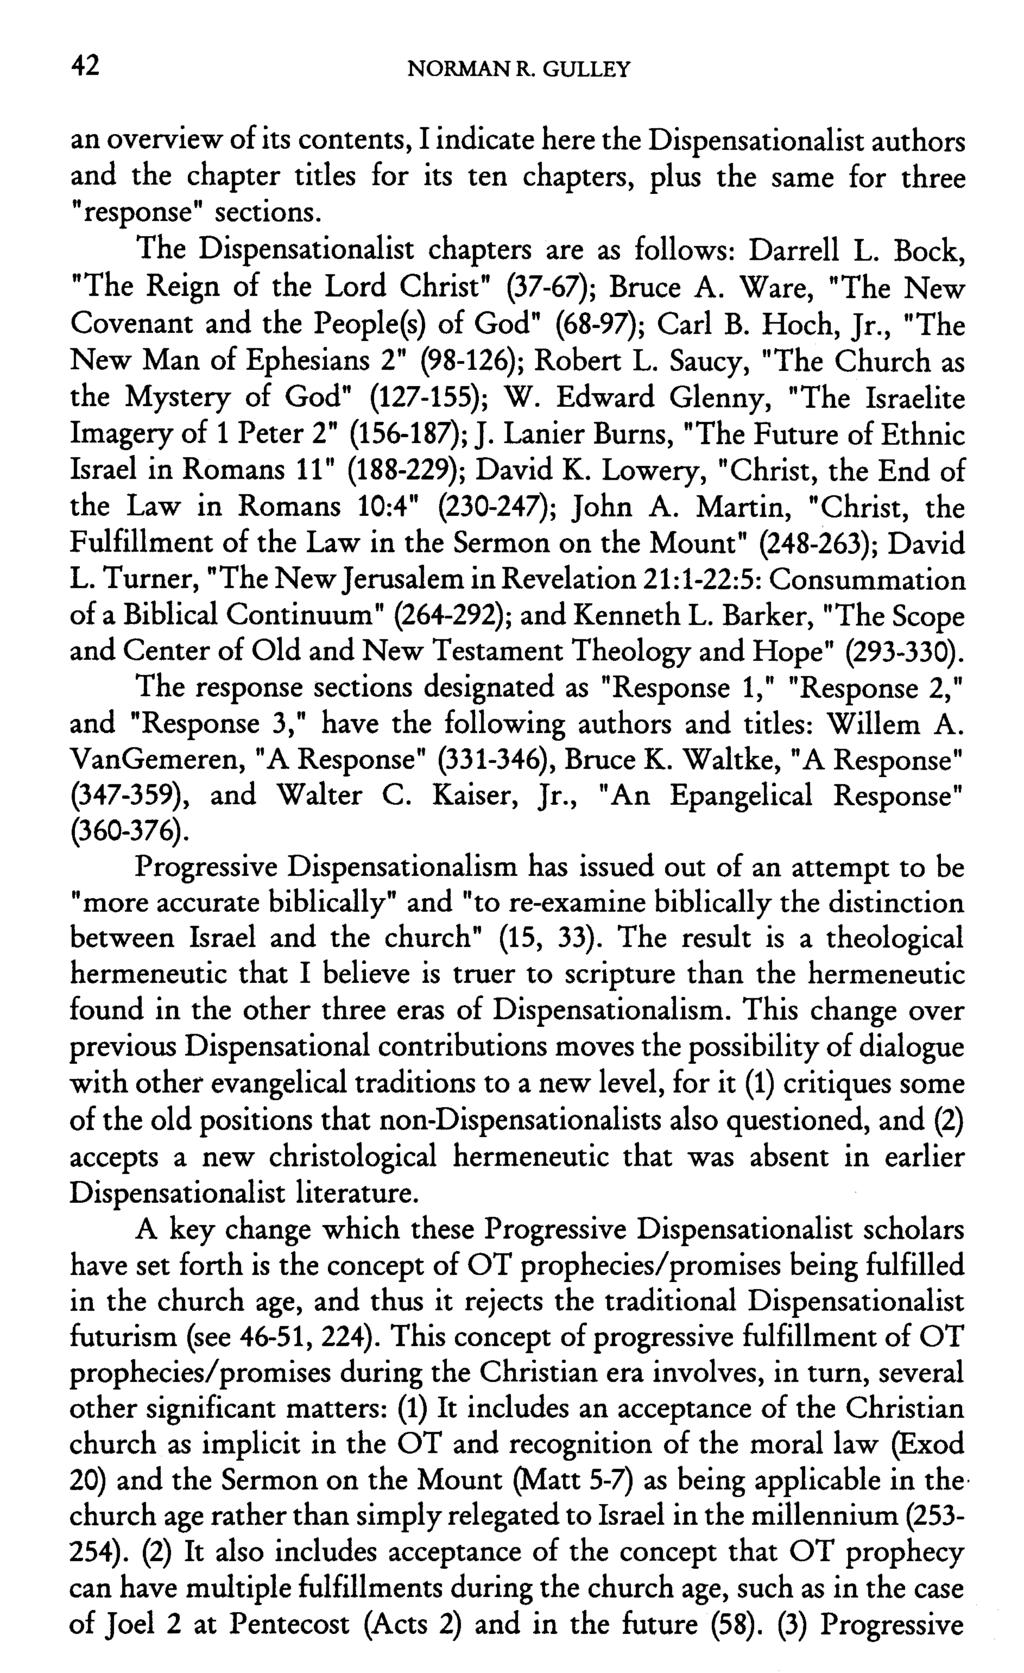 42 NORMAN R. GULLEY an overview of its contents, I indicate here the Dispensationalist authors and the chapter titles for its ten chapters, plus the same for three "response" sections.